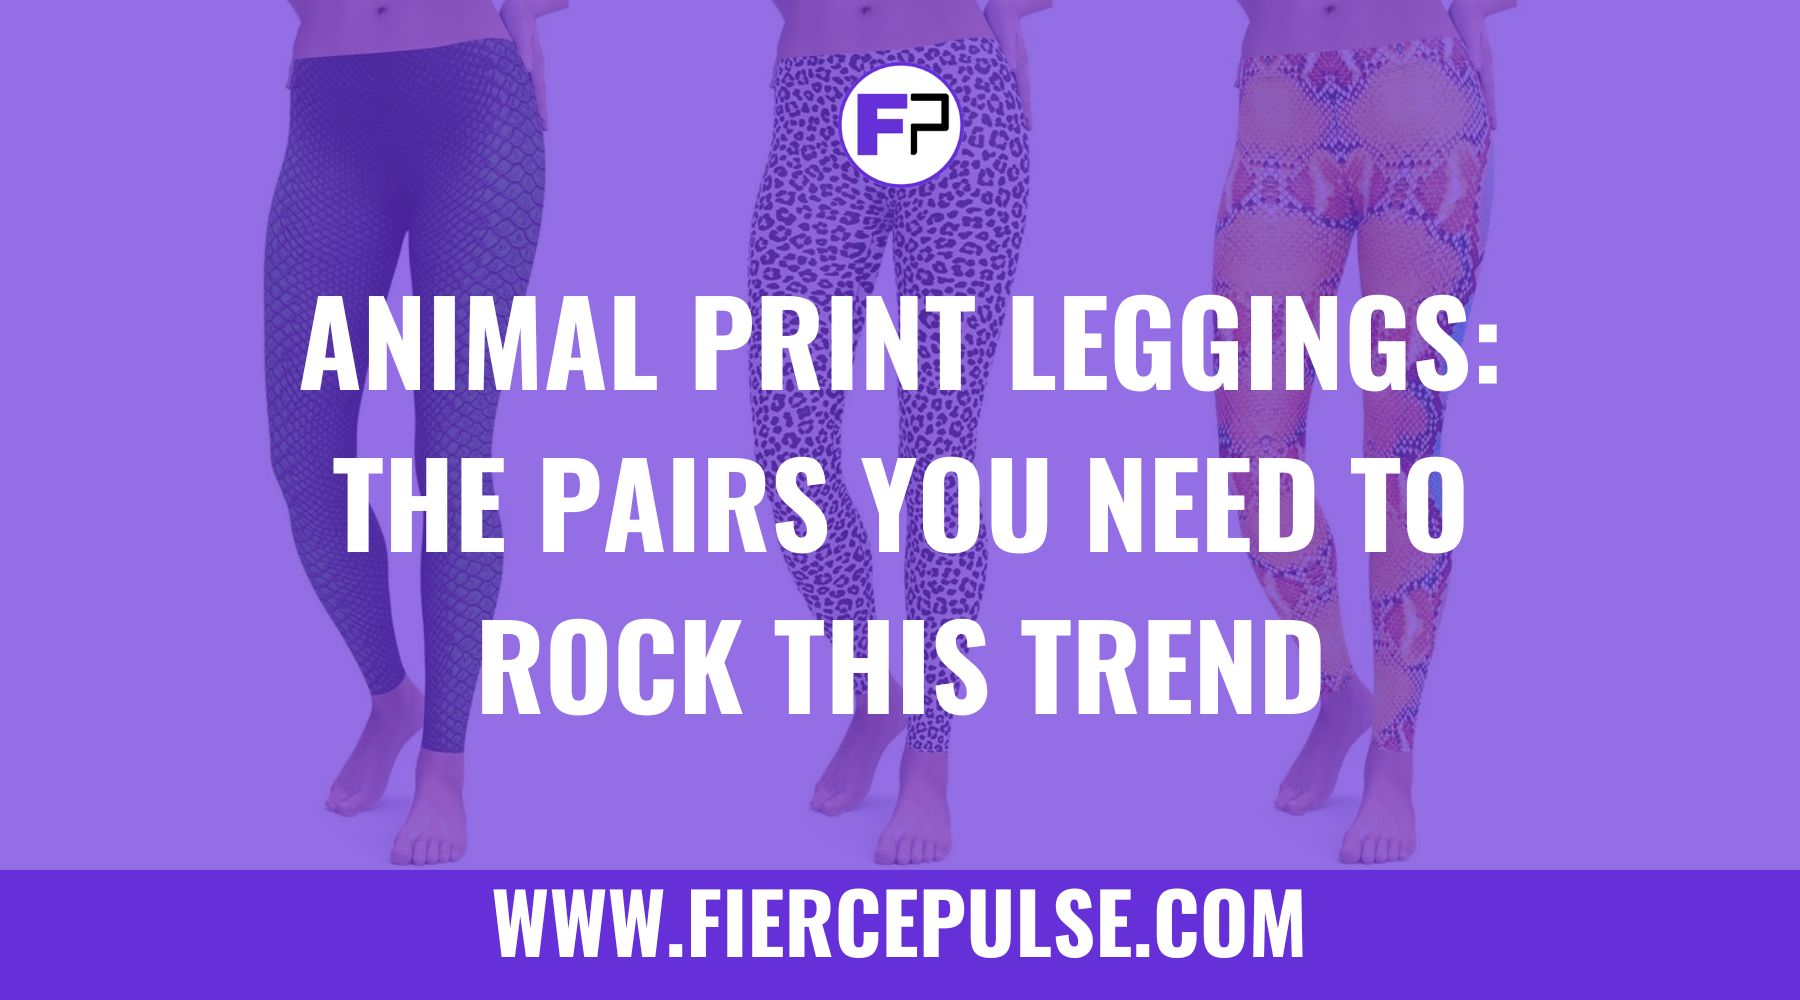 Animal Print Leggings Pairs You Need to Rock This Trend